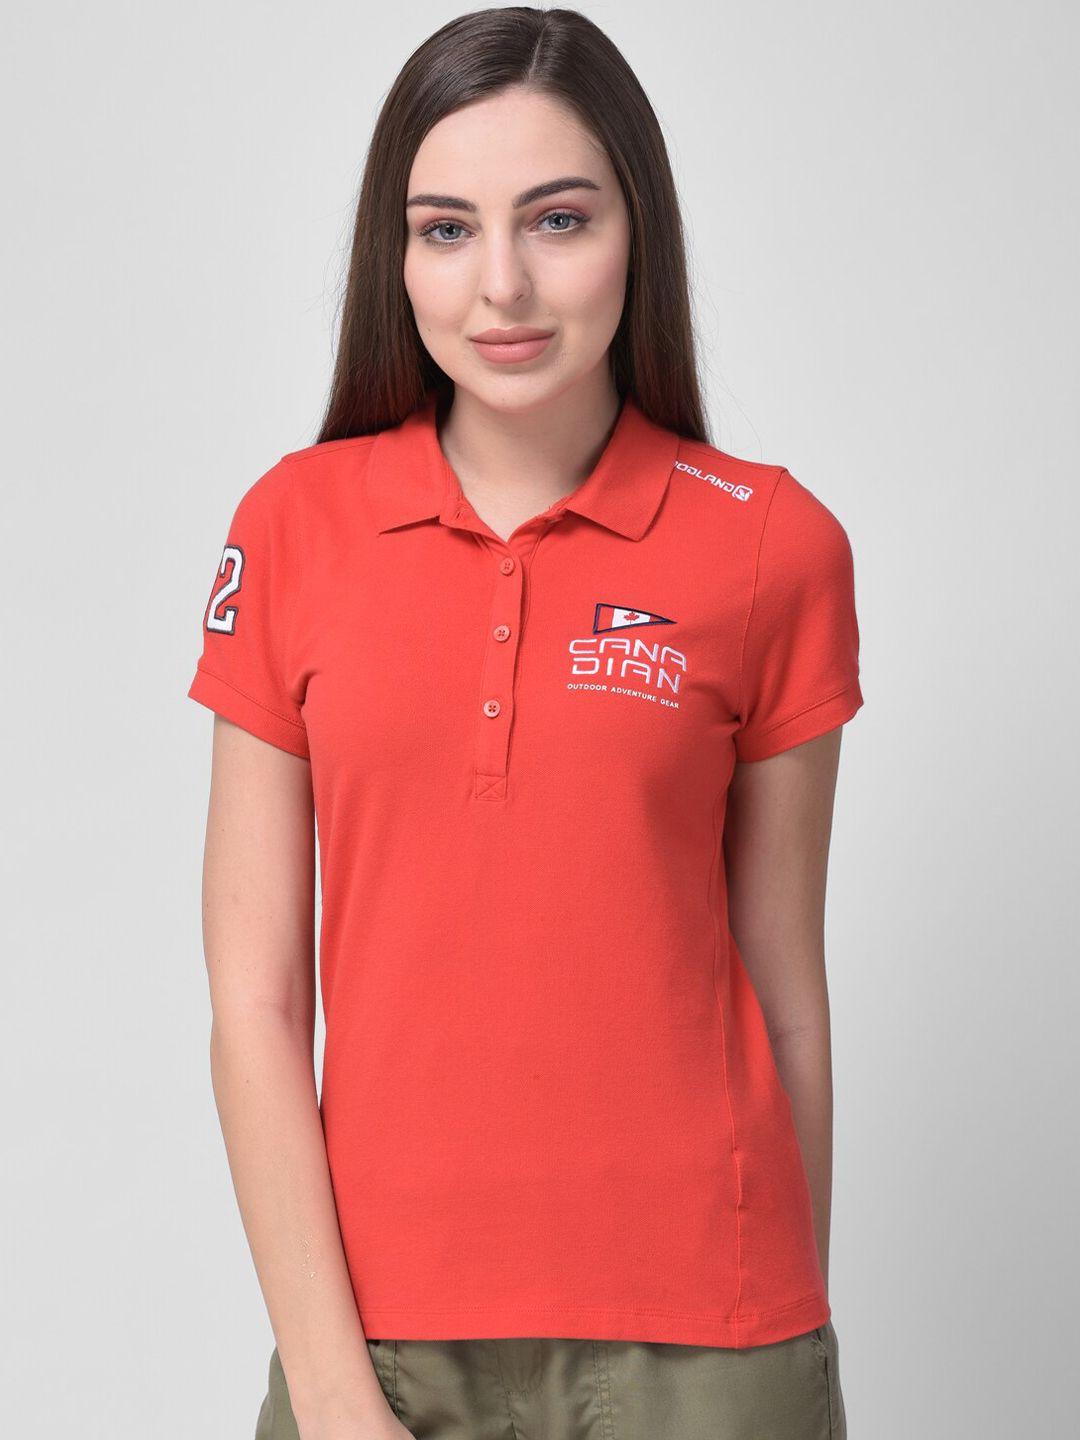 woodland-women-red-embroidered-detail-polo-collar-t-shirt